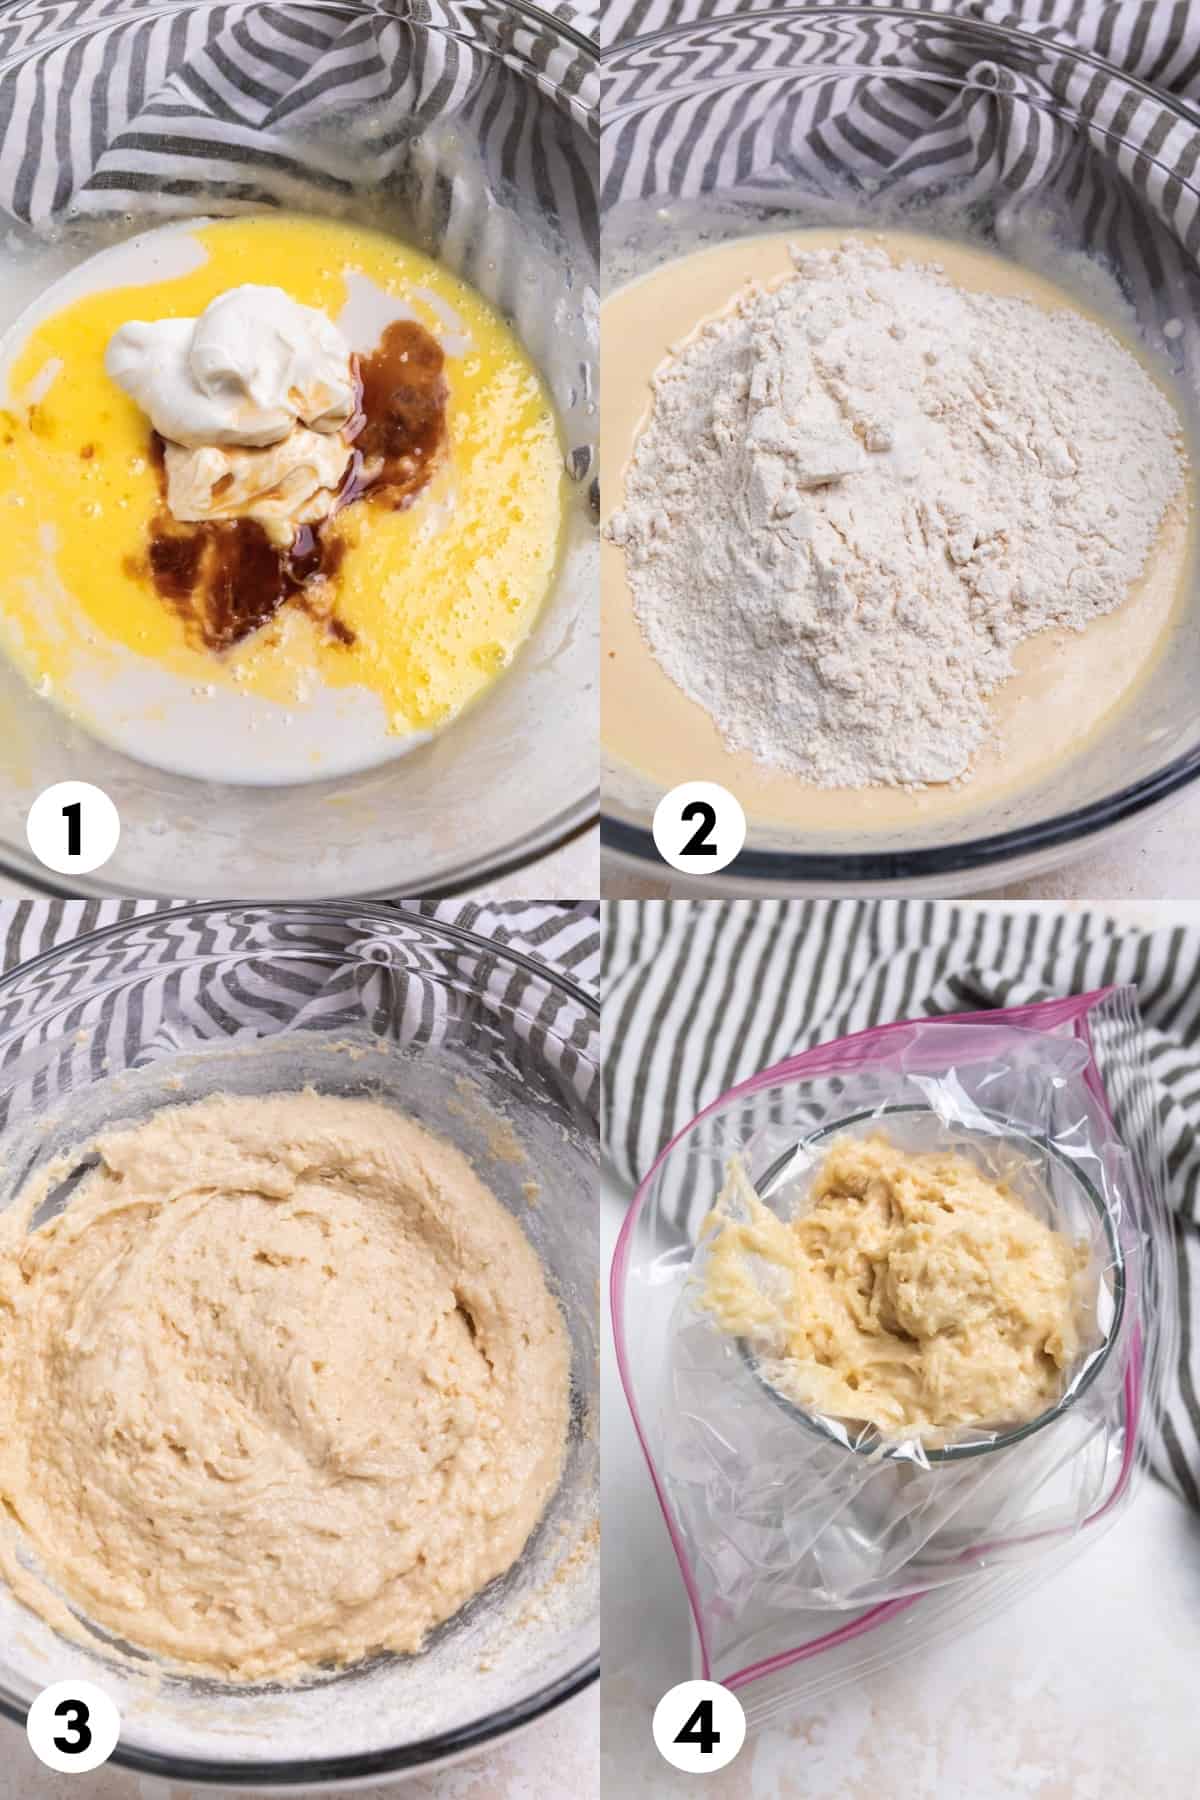 Step by step process of making vanilla donuts in glass mixing bowl.